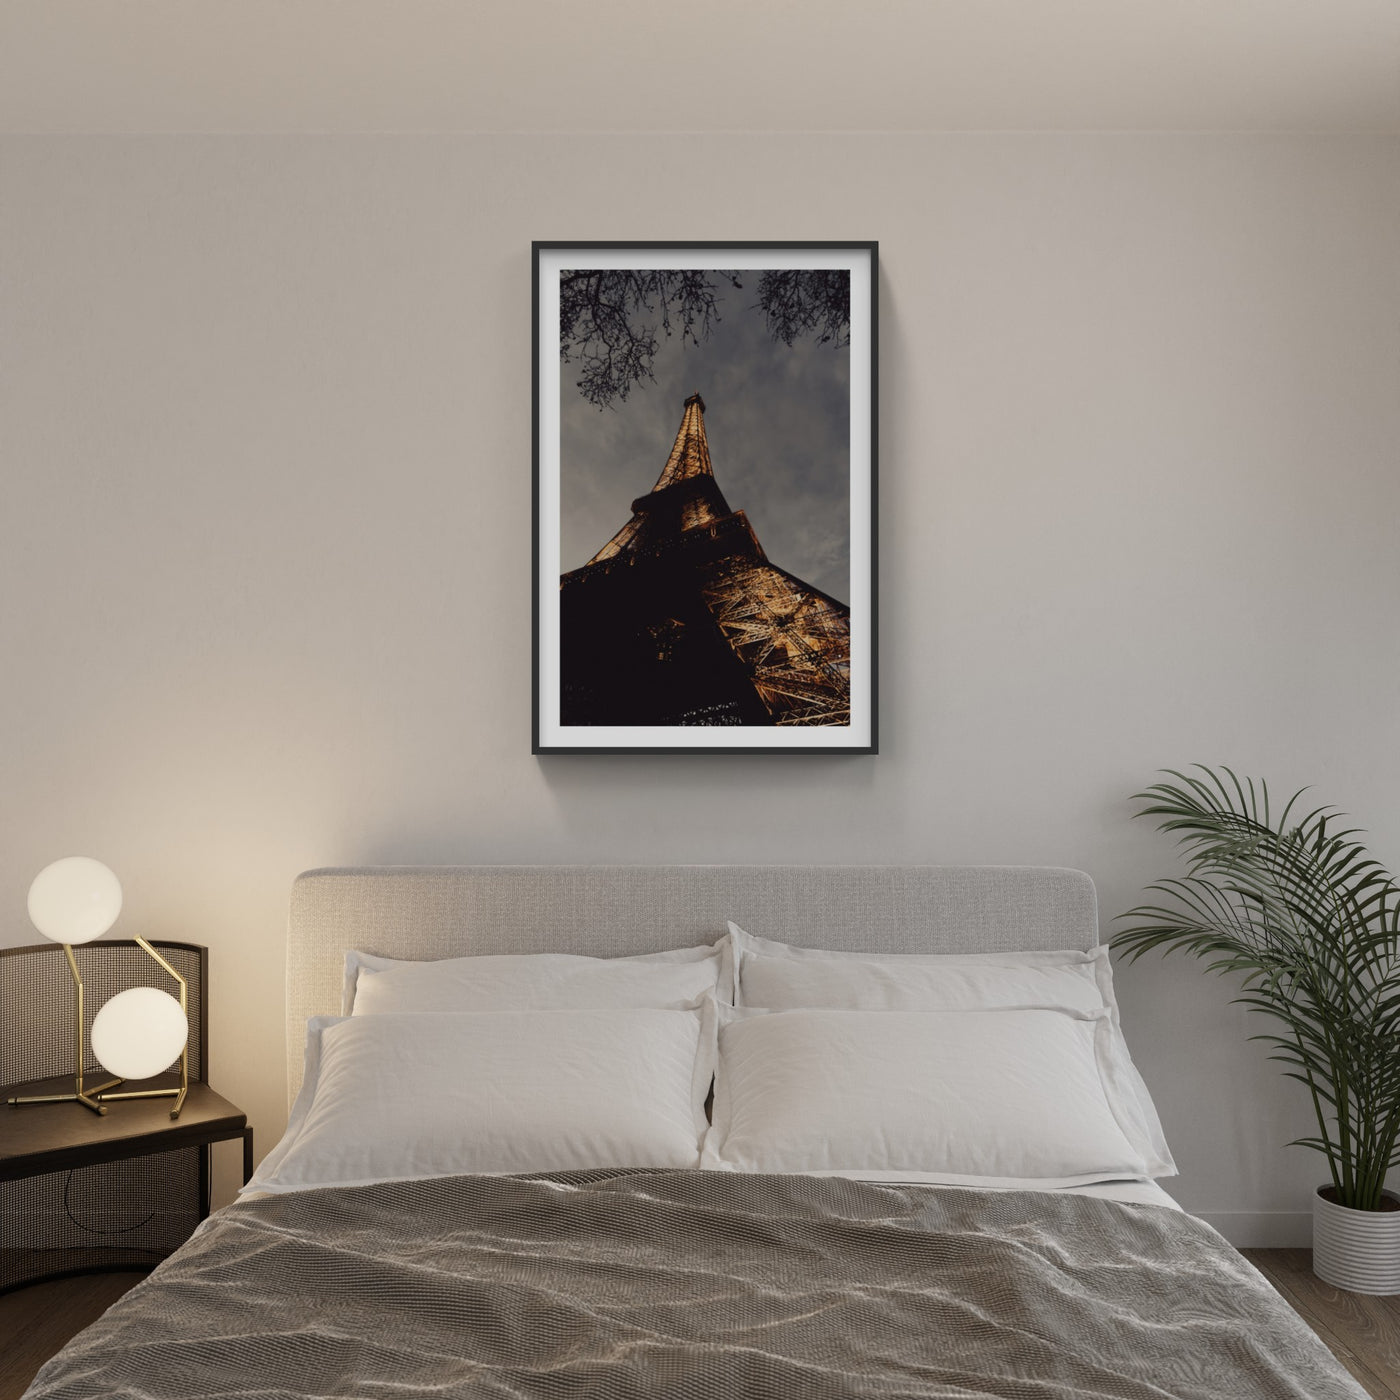 Eiffel Tower lit up at night photo hanging above bed